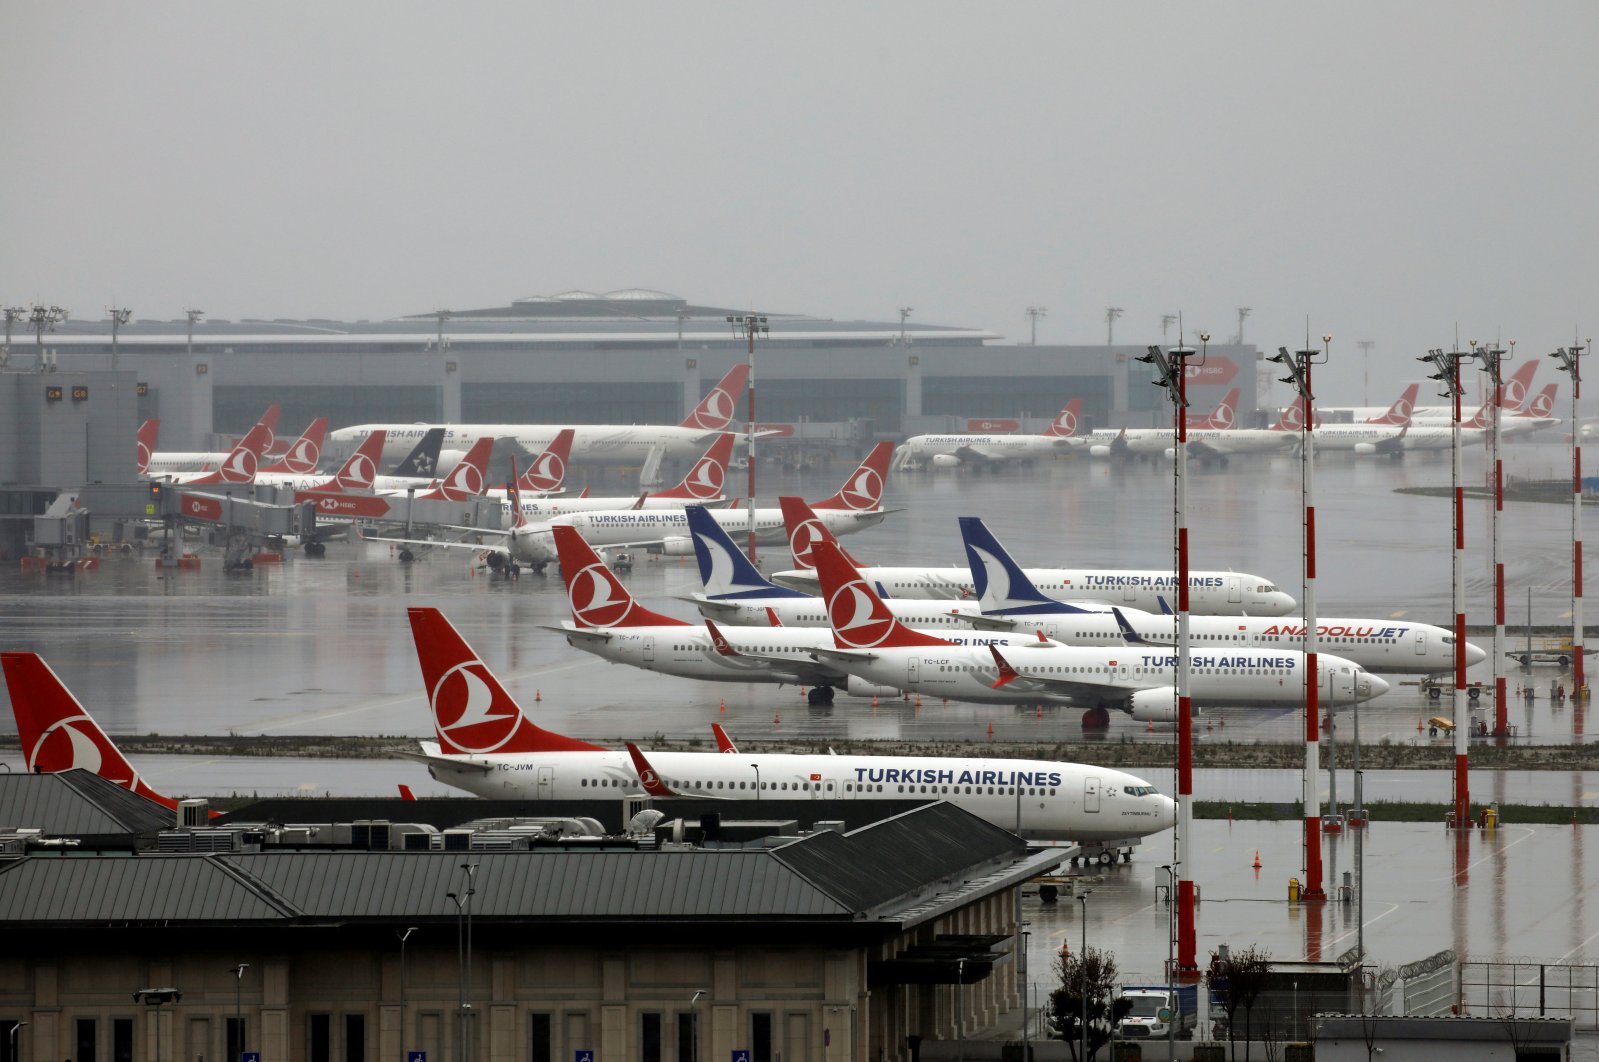 Turkish Airlines airplanes sit on a tarmac, during the outbreak of COVID-19, at Istanbul Airport, Sunday, March 29, 2020. (Reuters Photo)